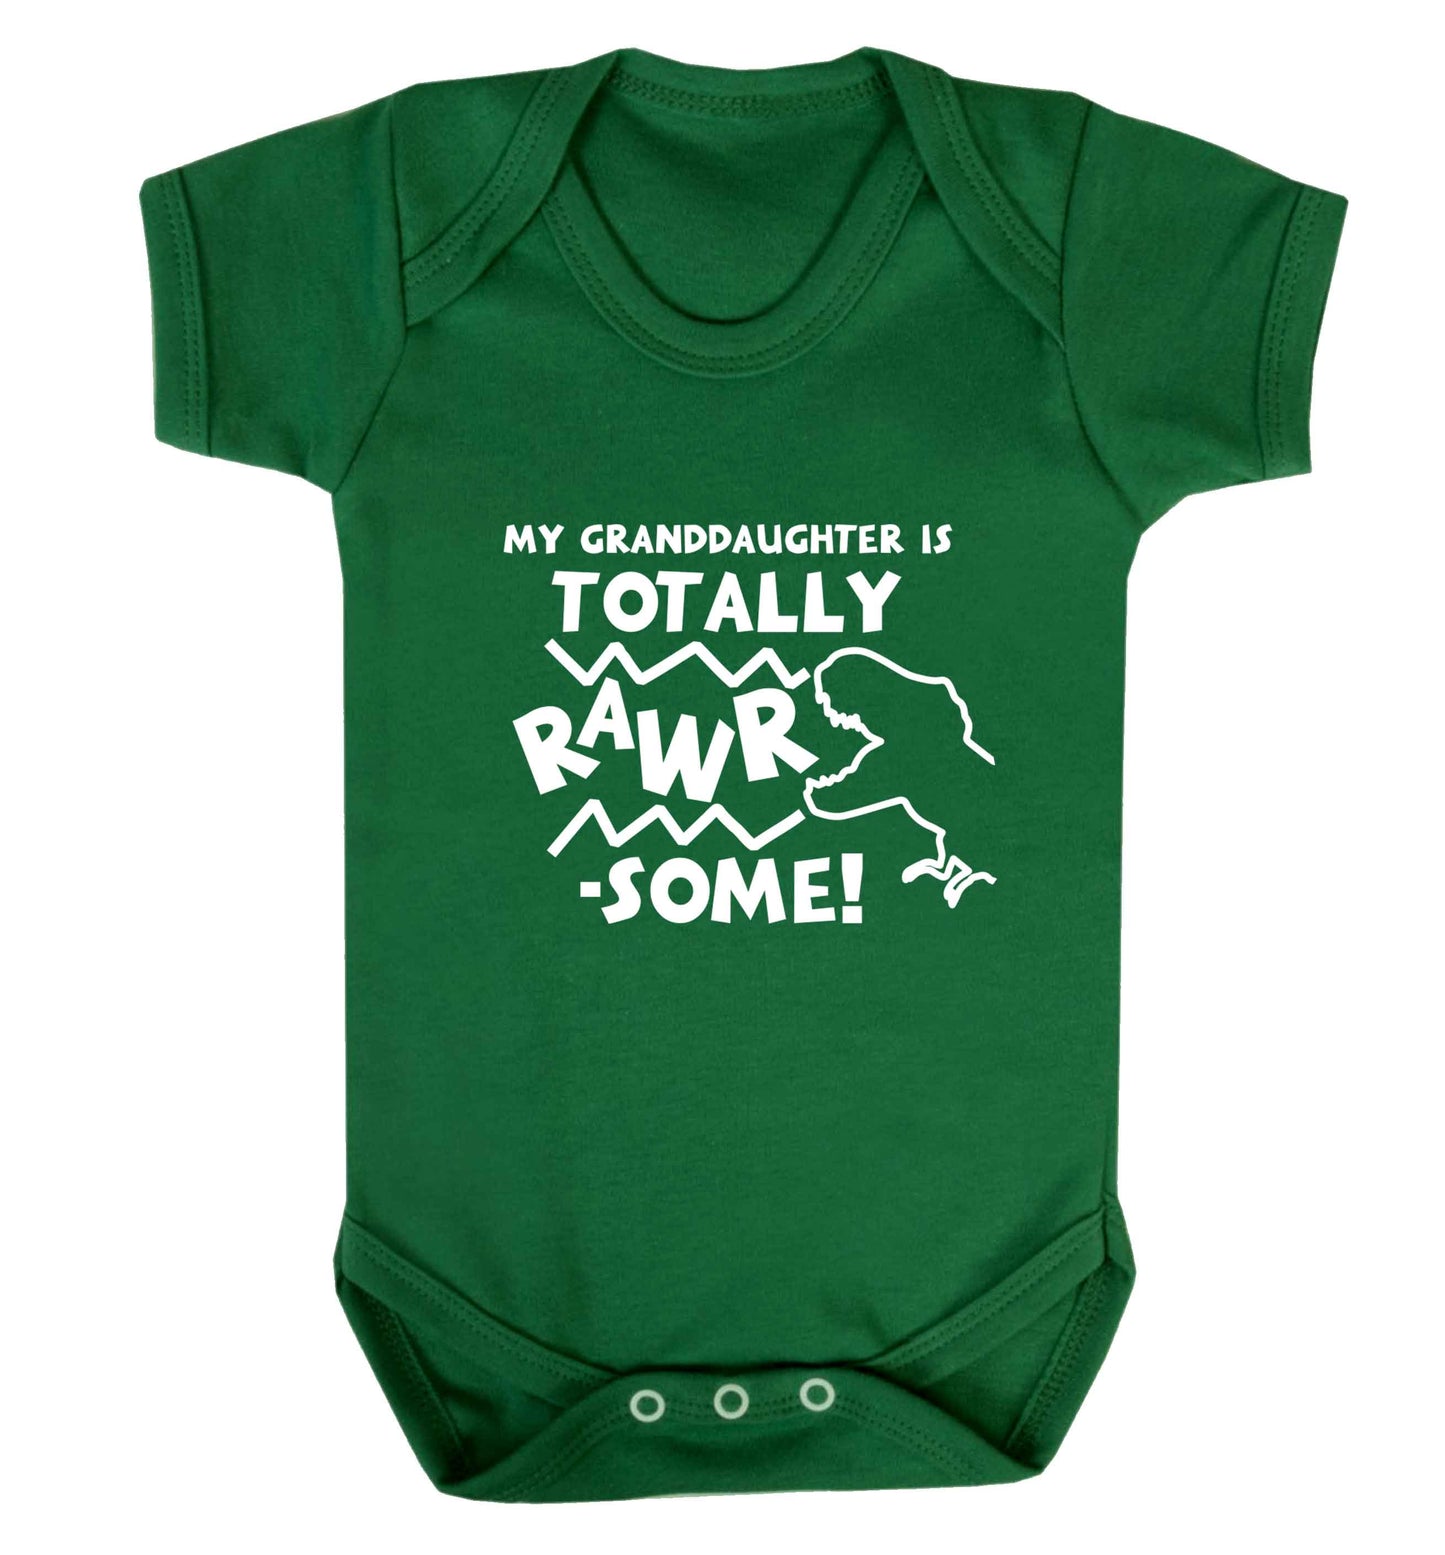 My granddaughter is totally rawrsome baby vest green 18-24 months